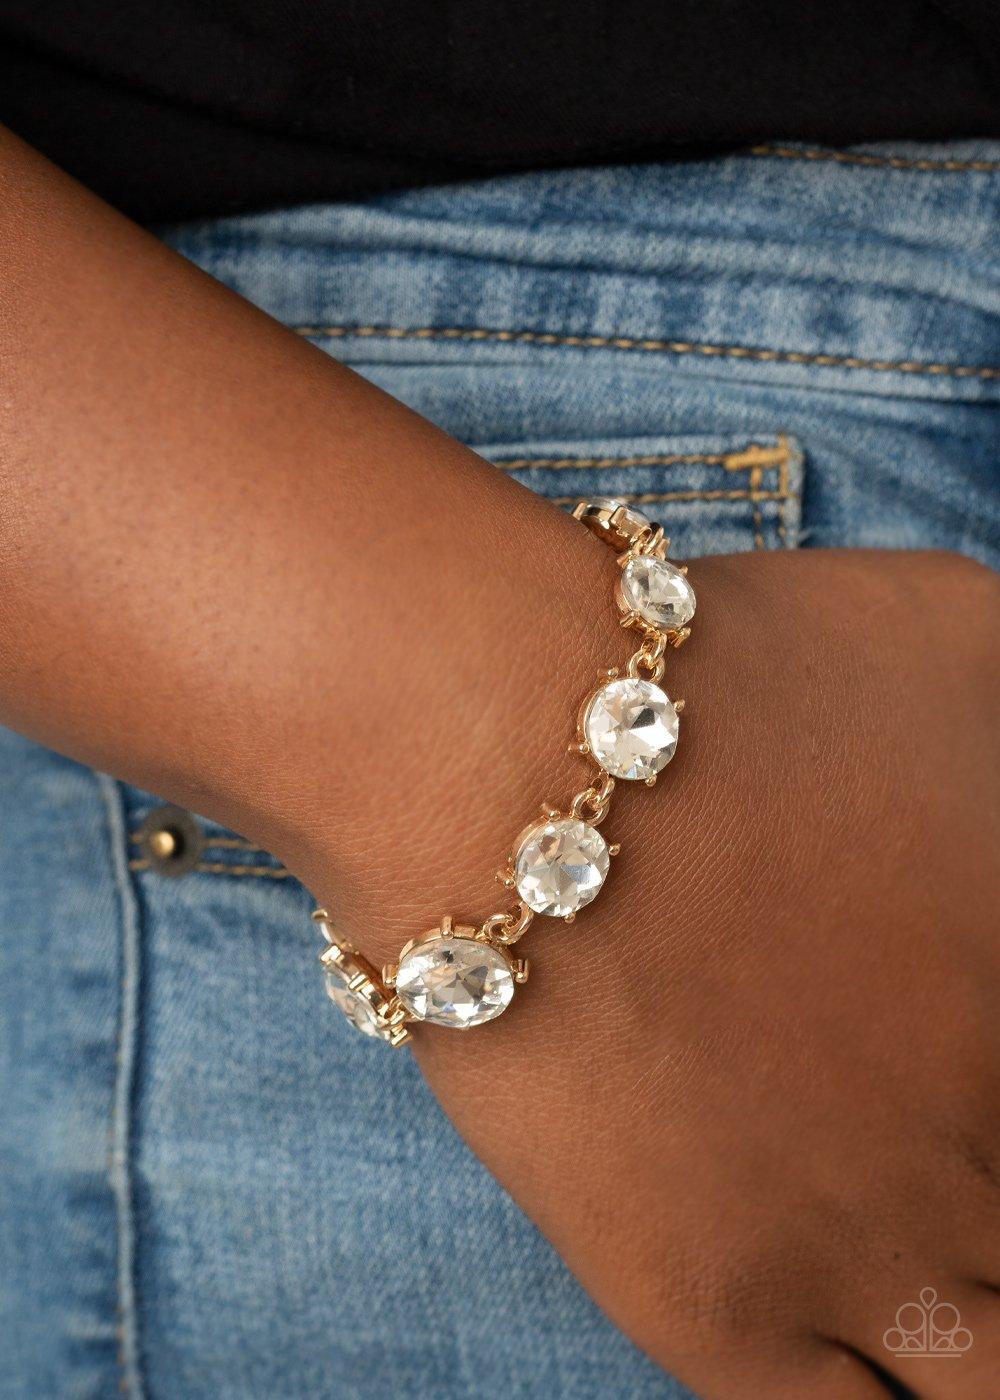 Paparazzi Accessories-Cant Believe My ICE - Gold Bracelet